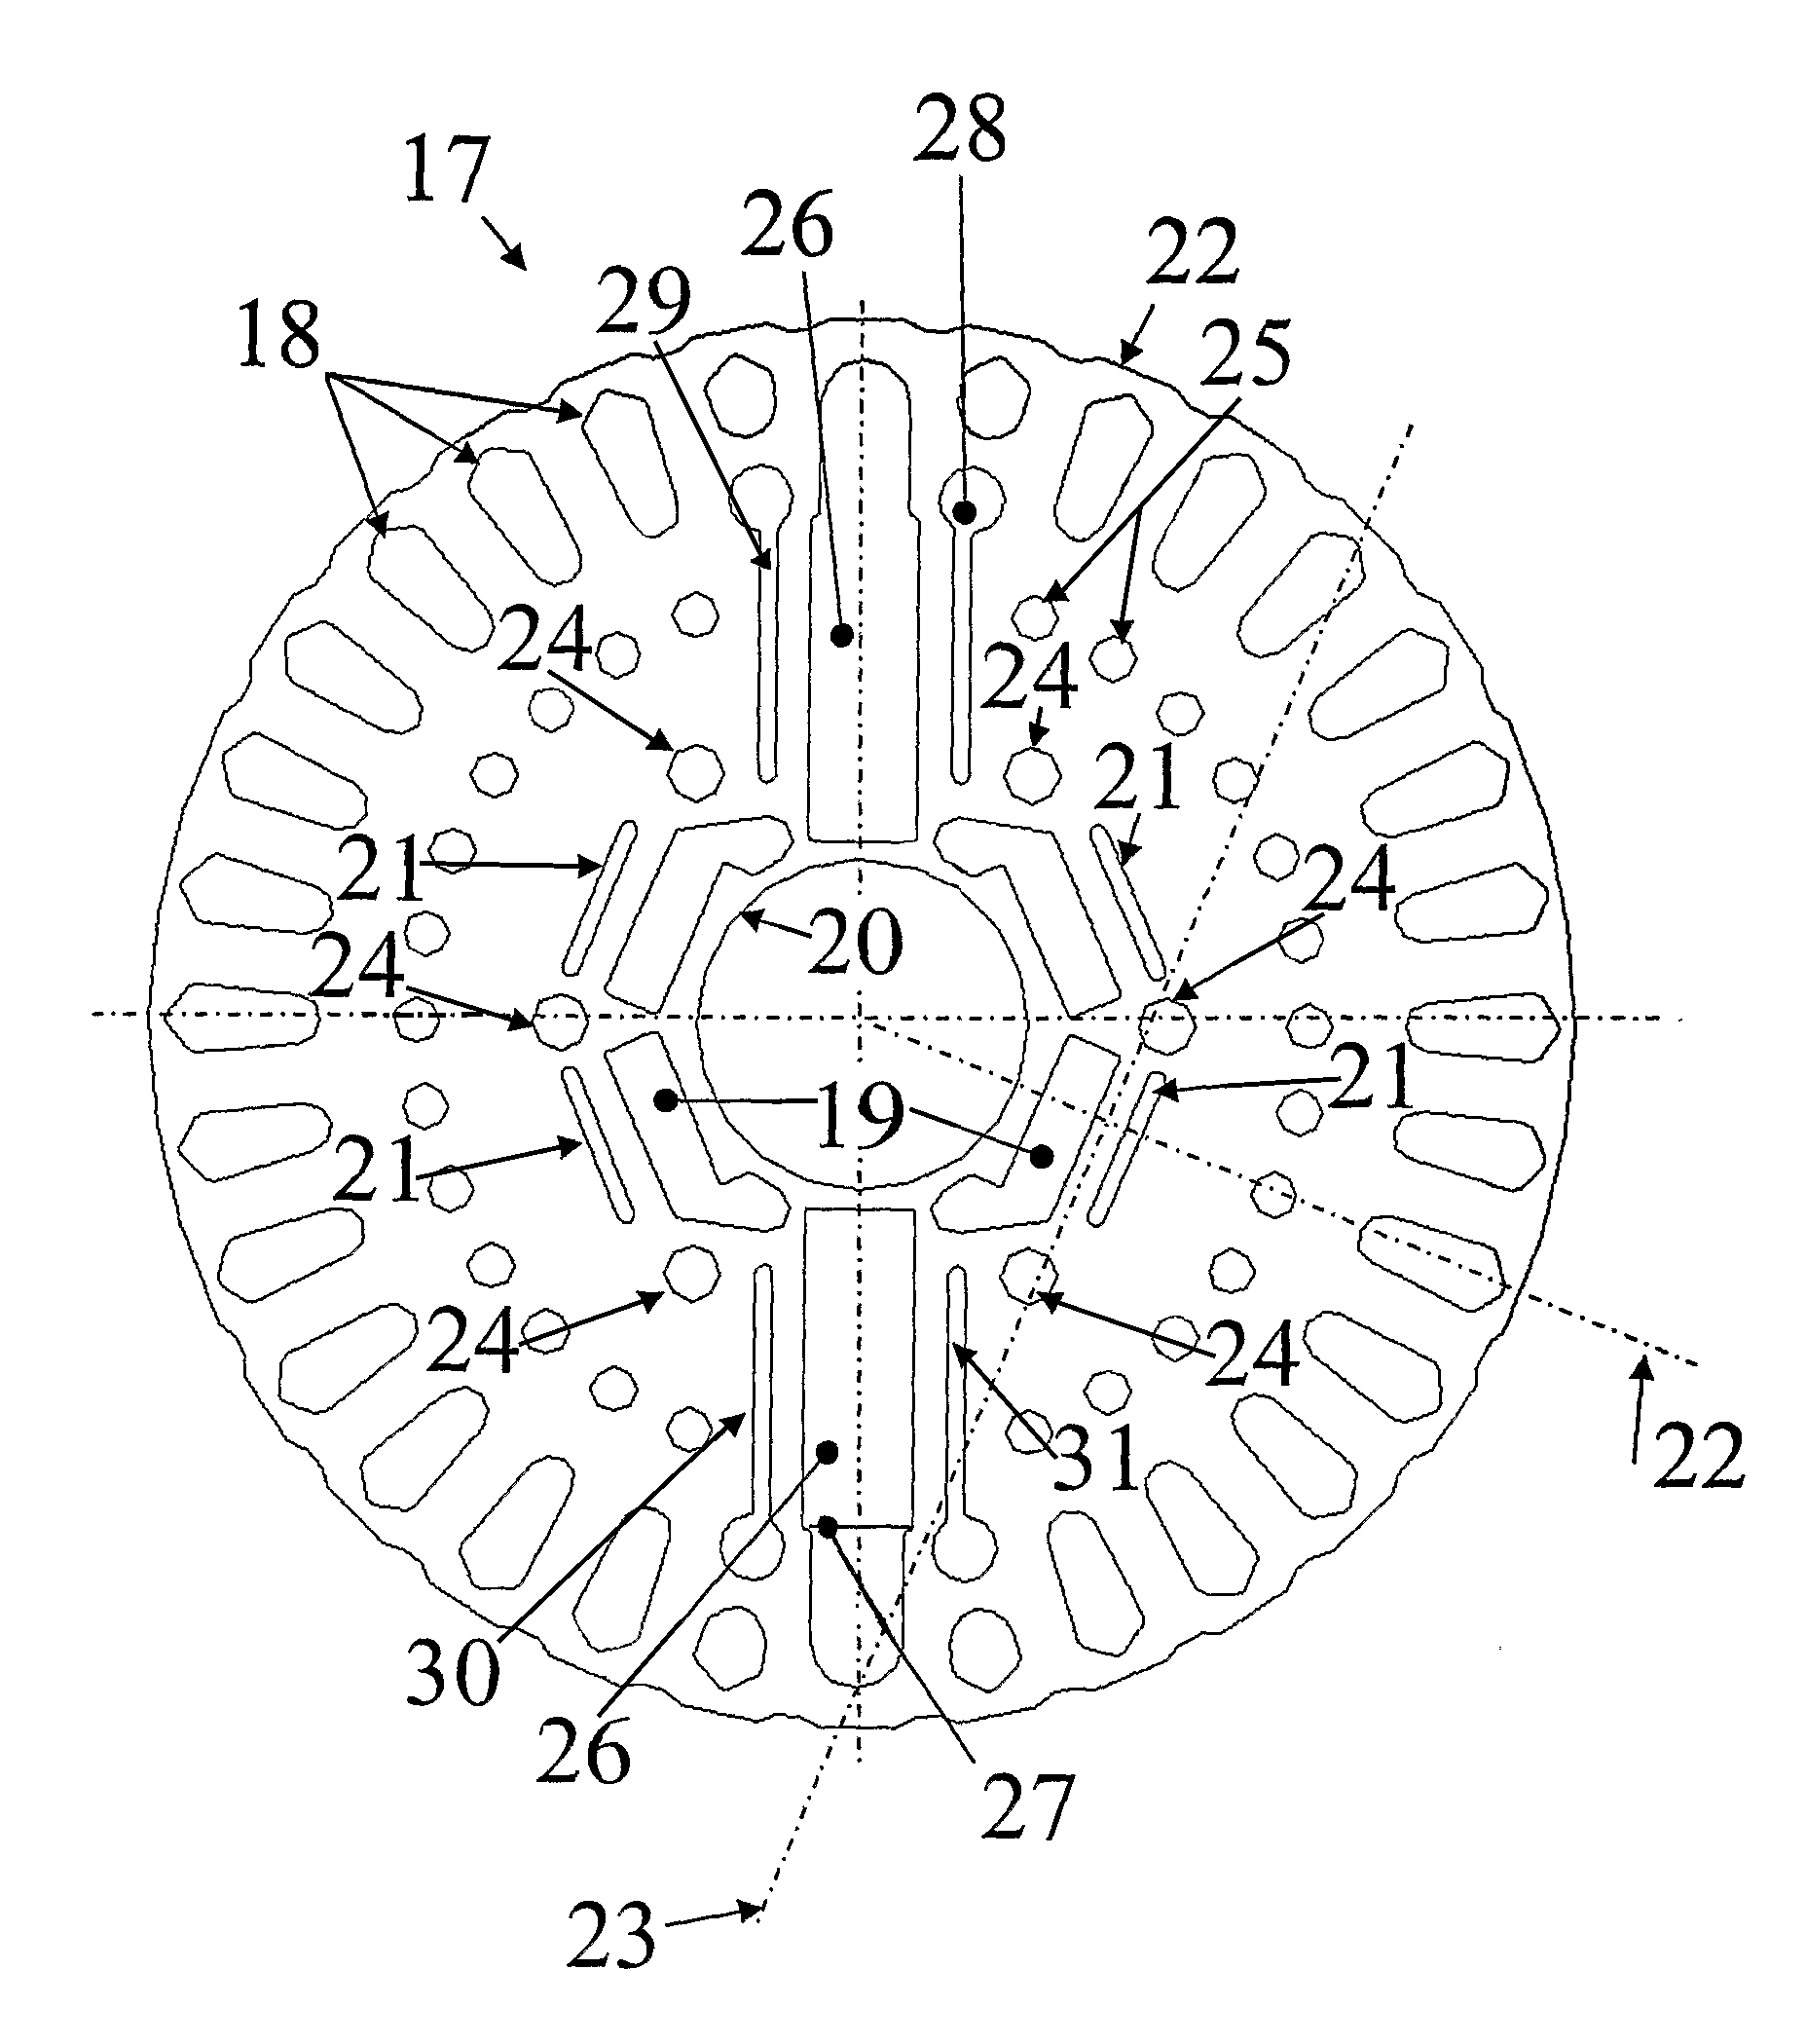 Rotor with a thermal barrier and a motor with such a rotor